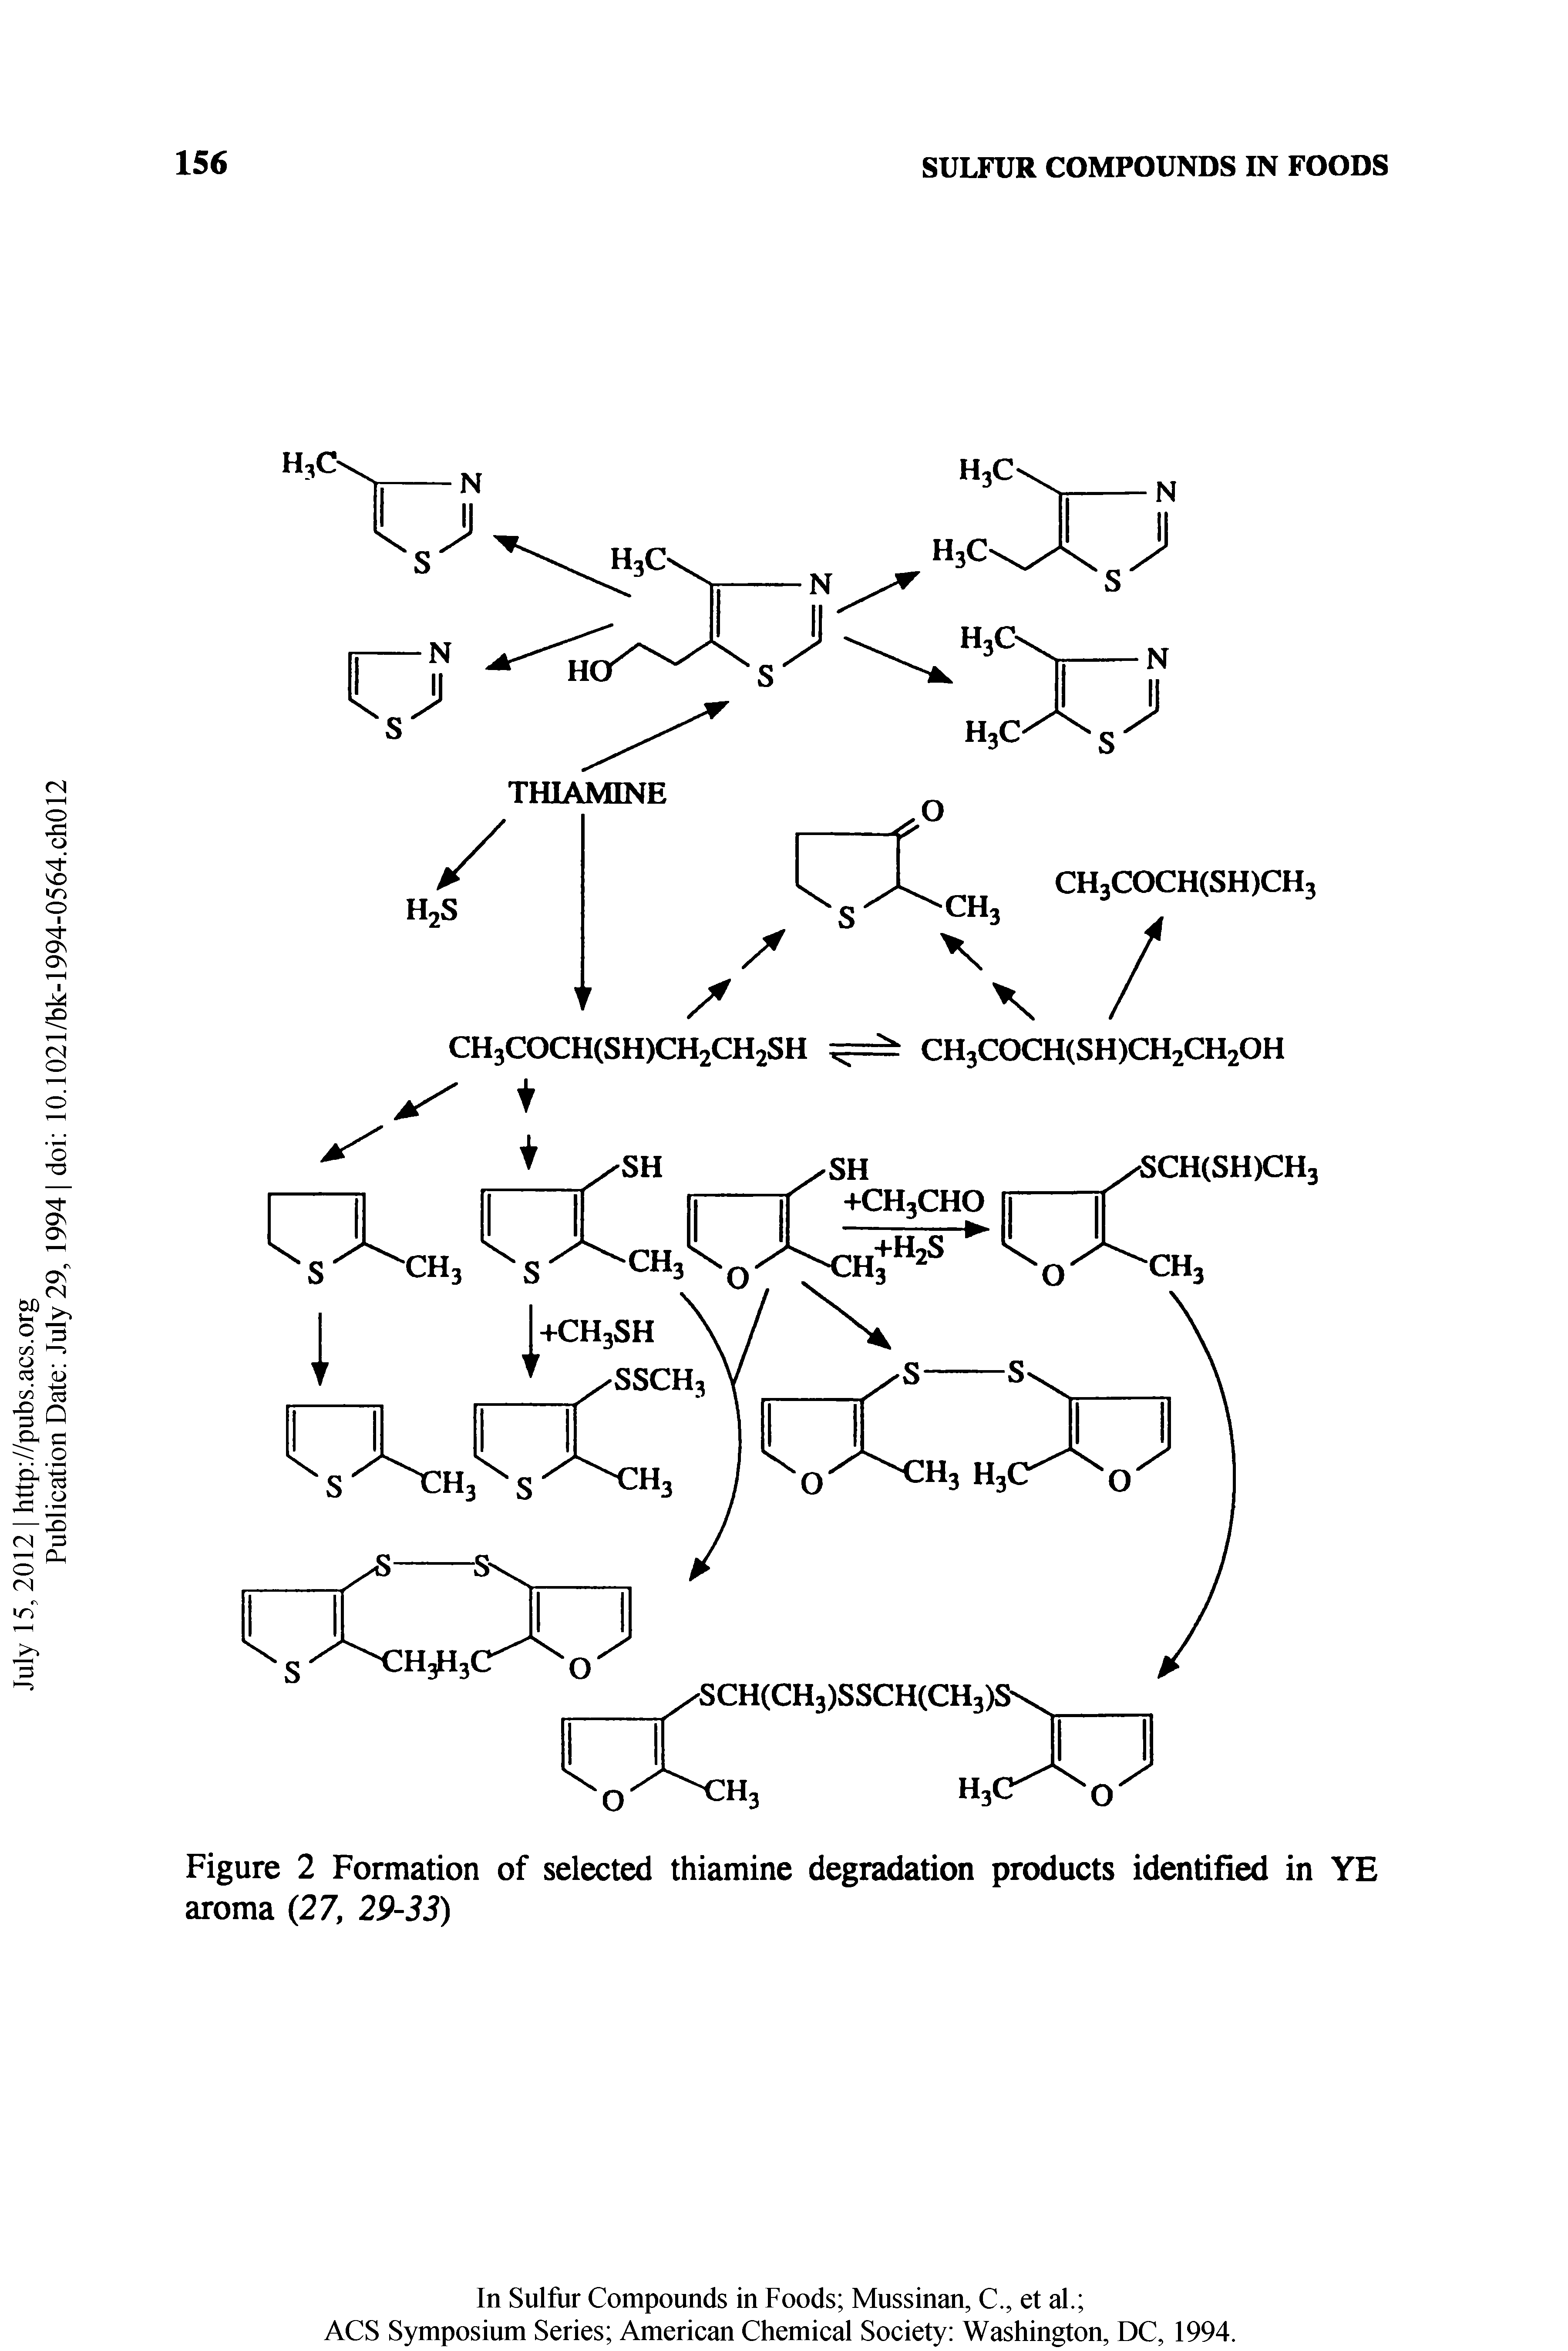 Figure 2 Formation of selected thiamine degradation products identified in YE aroma (27, 29-33)...